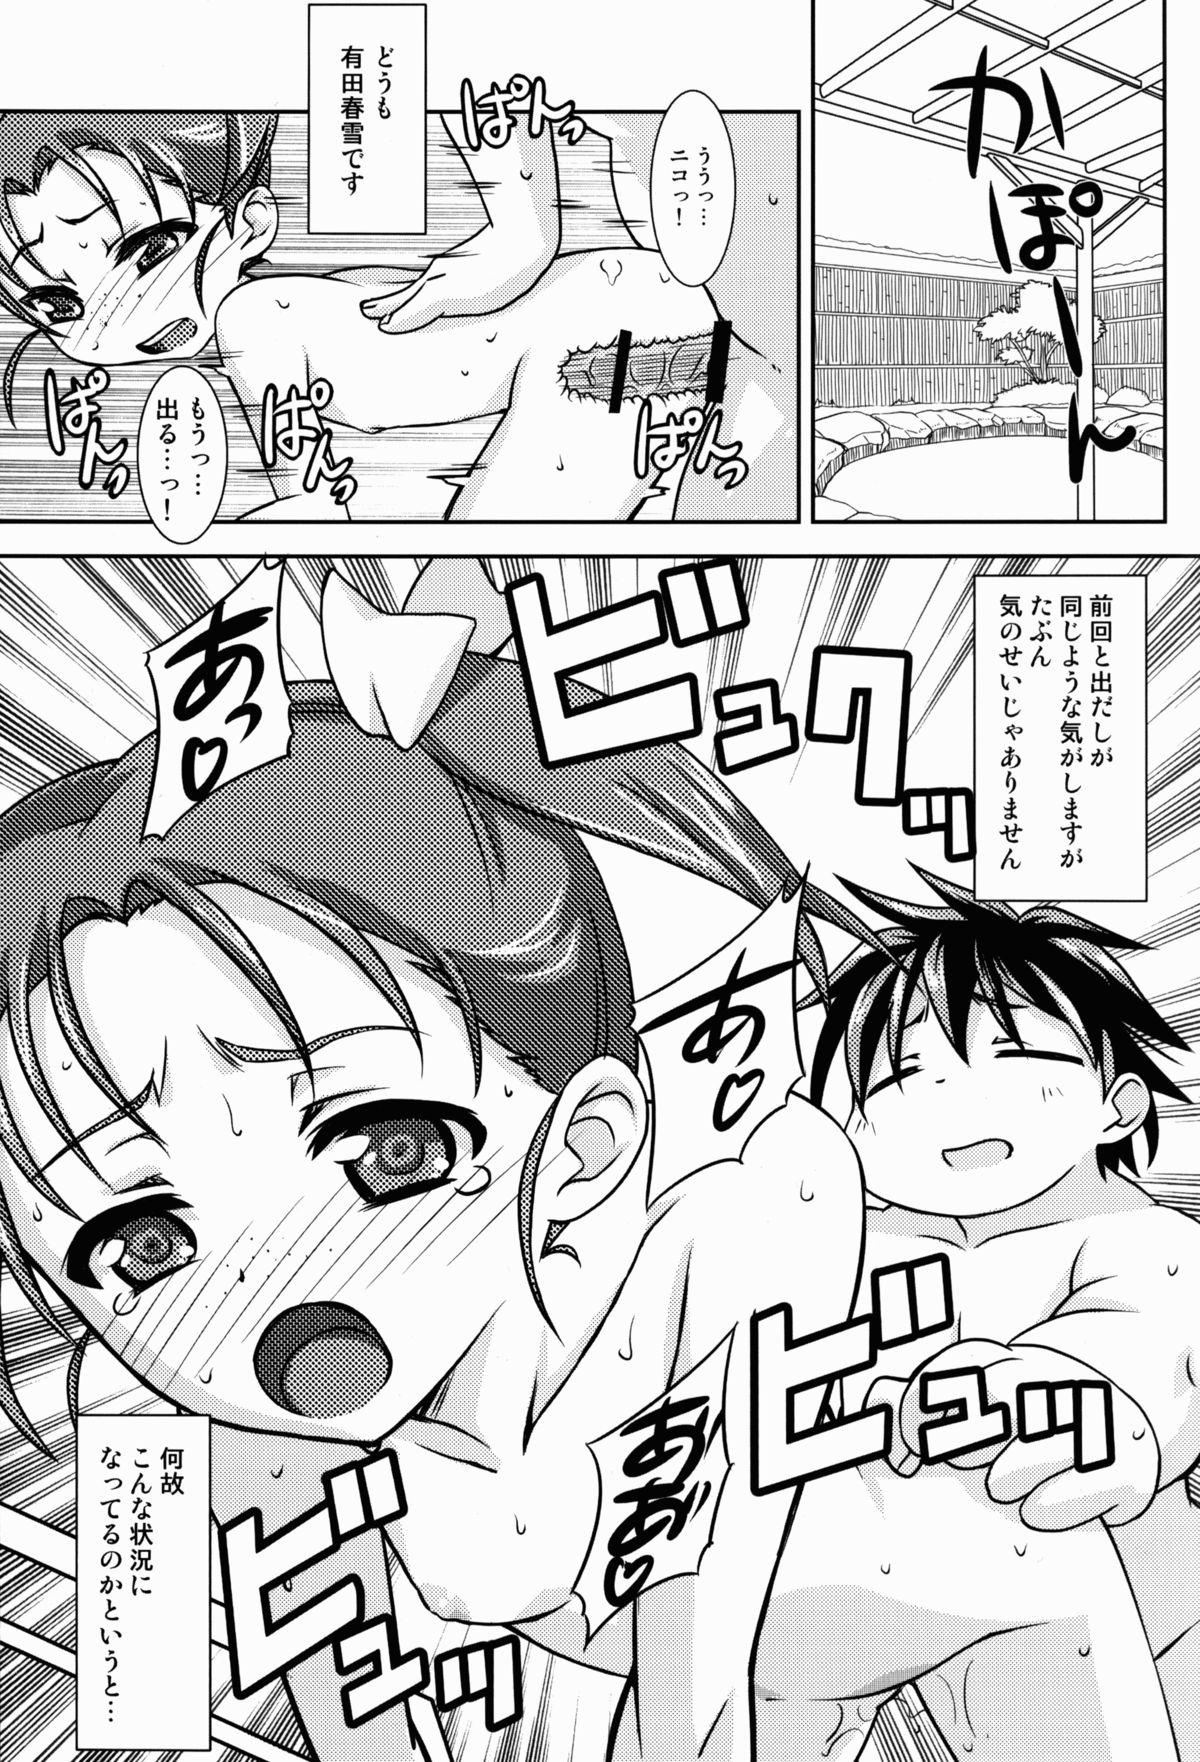 Moms Houkago Link 2 - Accel world Straight - Page 3